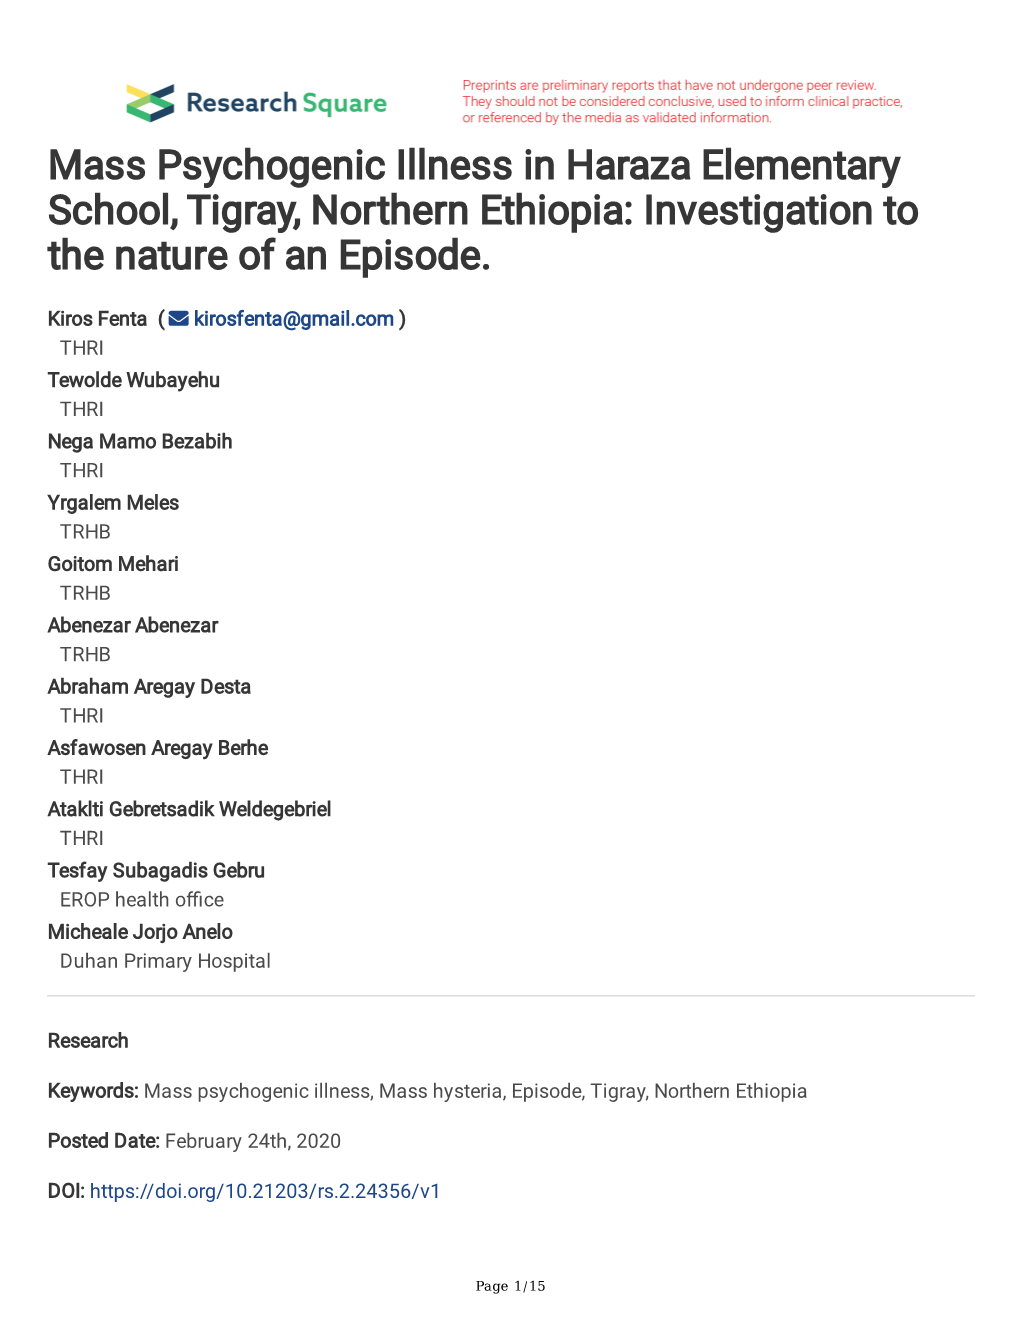 Mass Psychogenic Illness in Haraza Elementary School, Tigray, Northern Ethiopia: Investigation to the Nature of an Episode